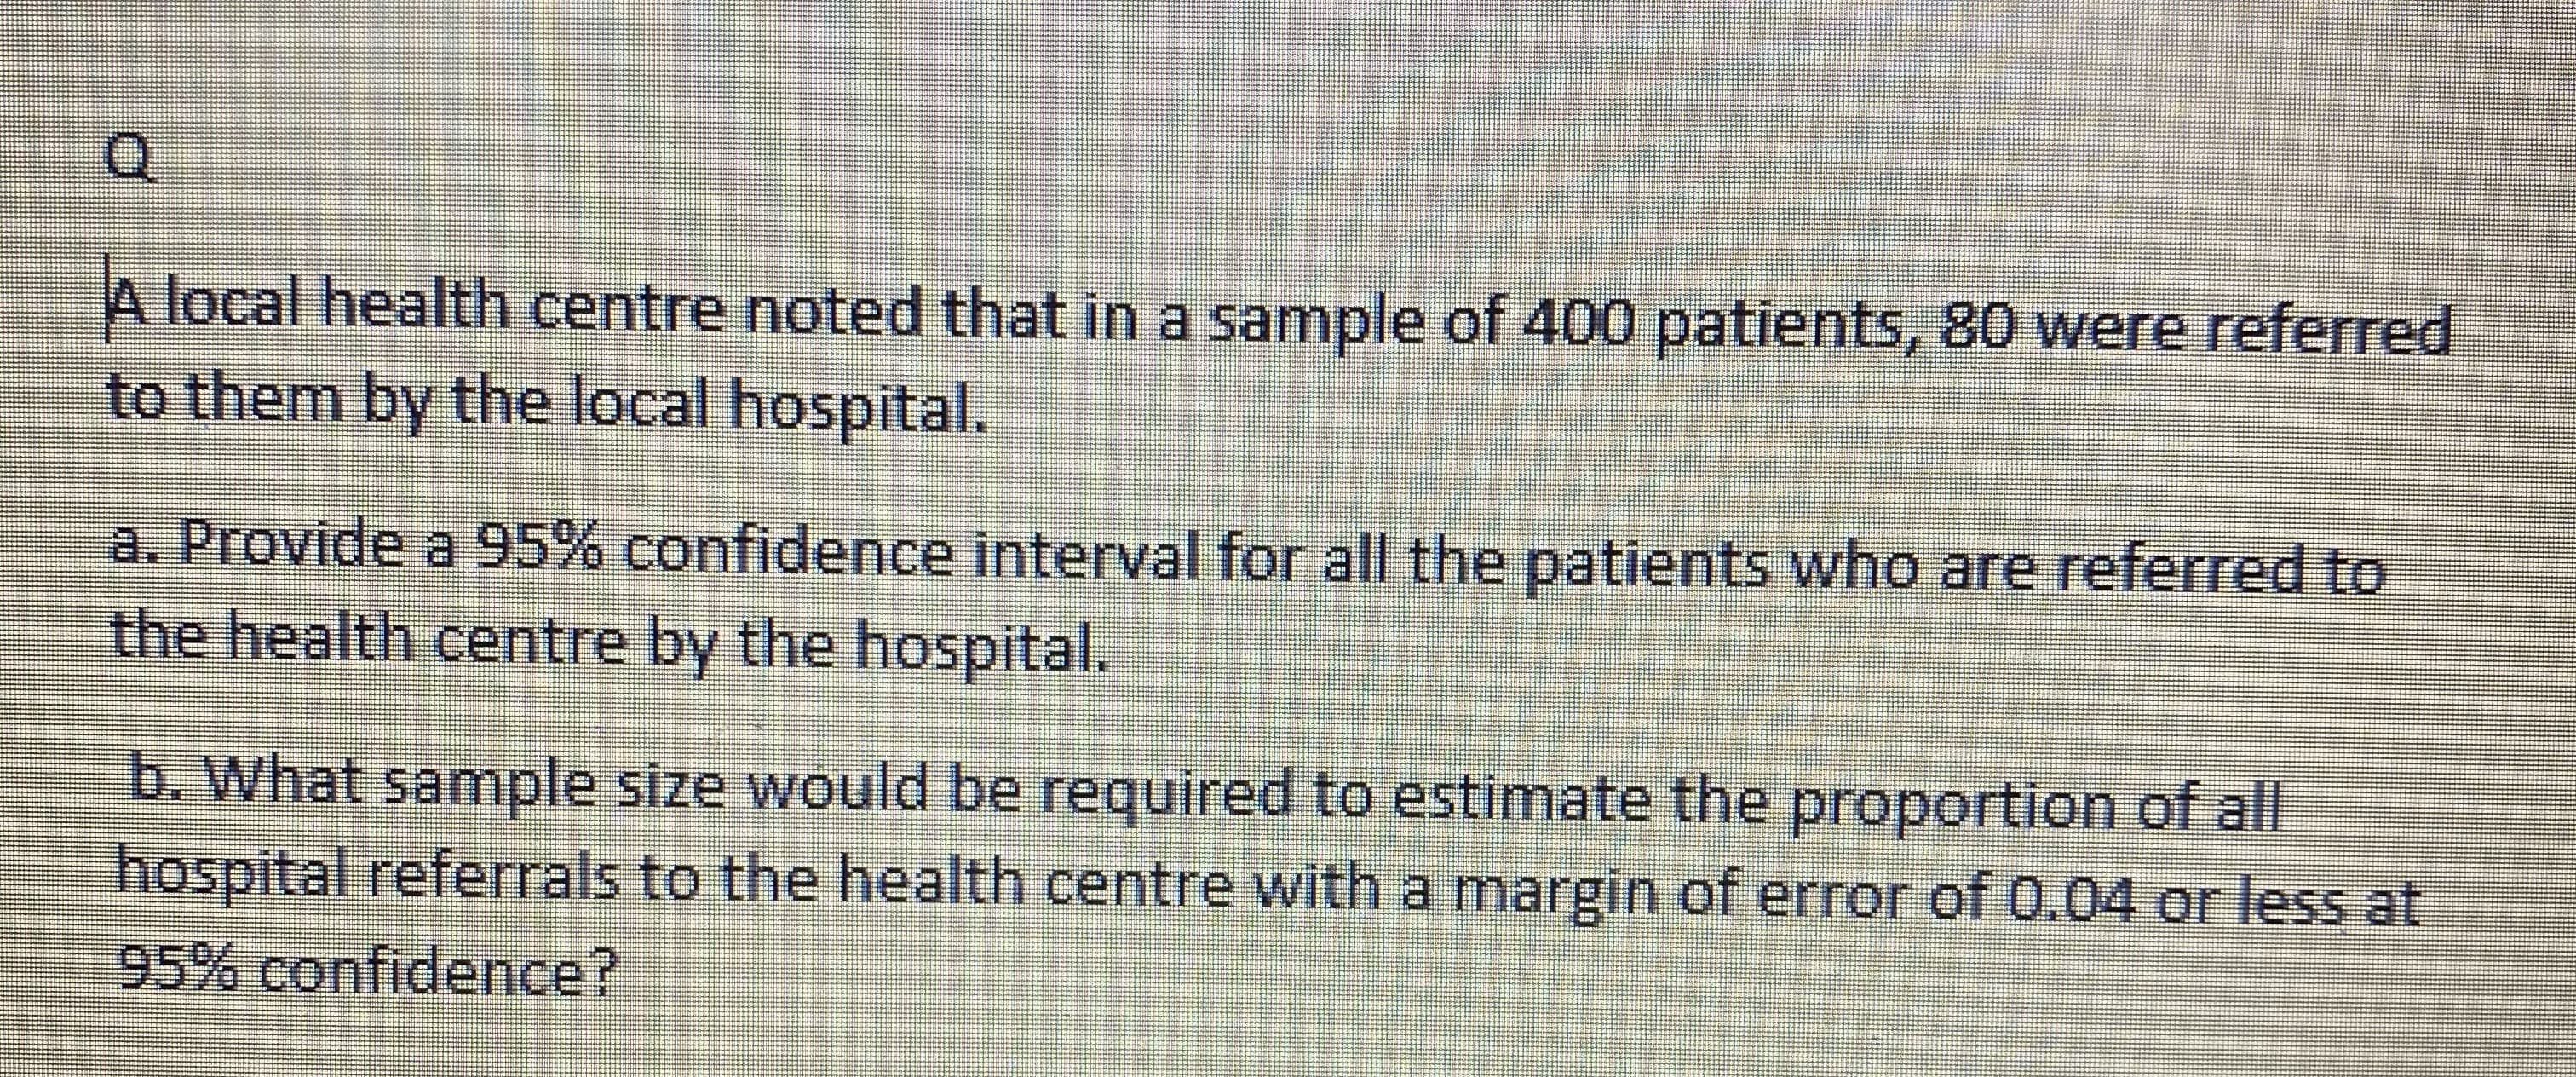 A local health centre noted that in a sample of 400 patients, 80 were referred
to them by the local hospital.
a. Provide a 95% confidence interval for all the patients who are referred to
the health centre by the hospital.
